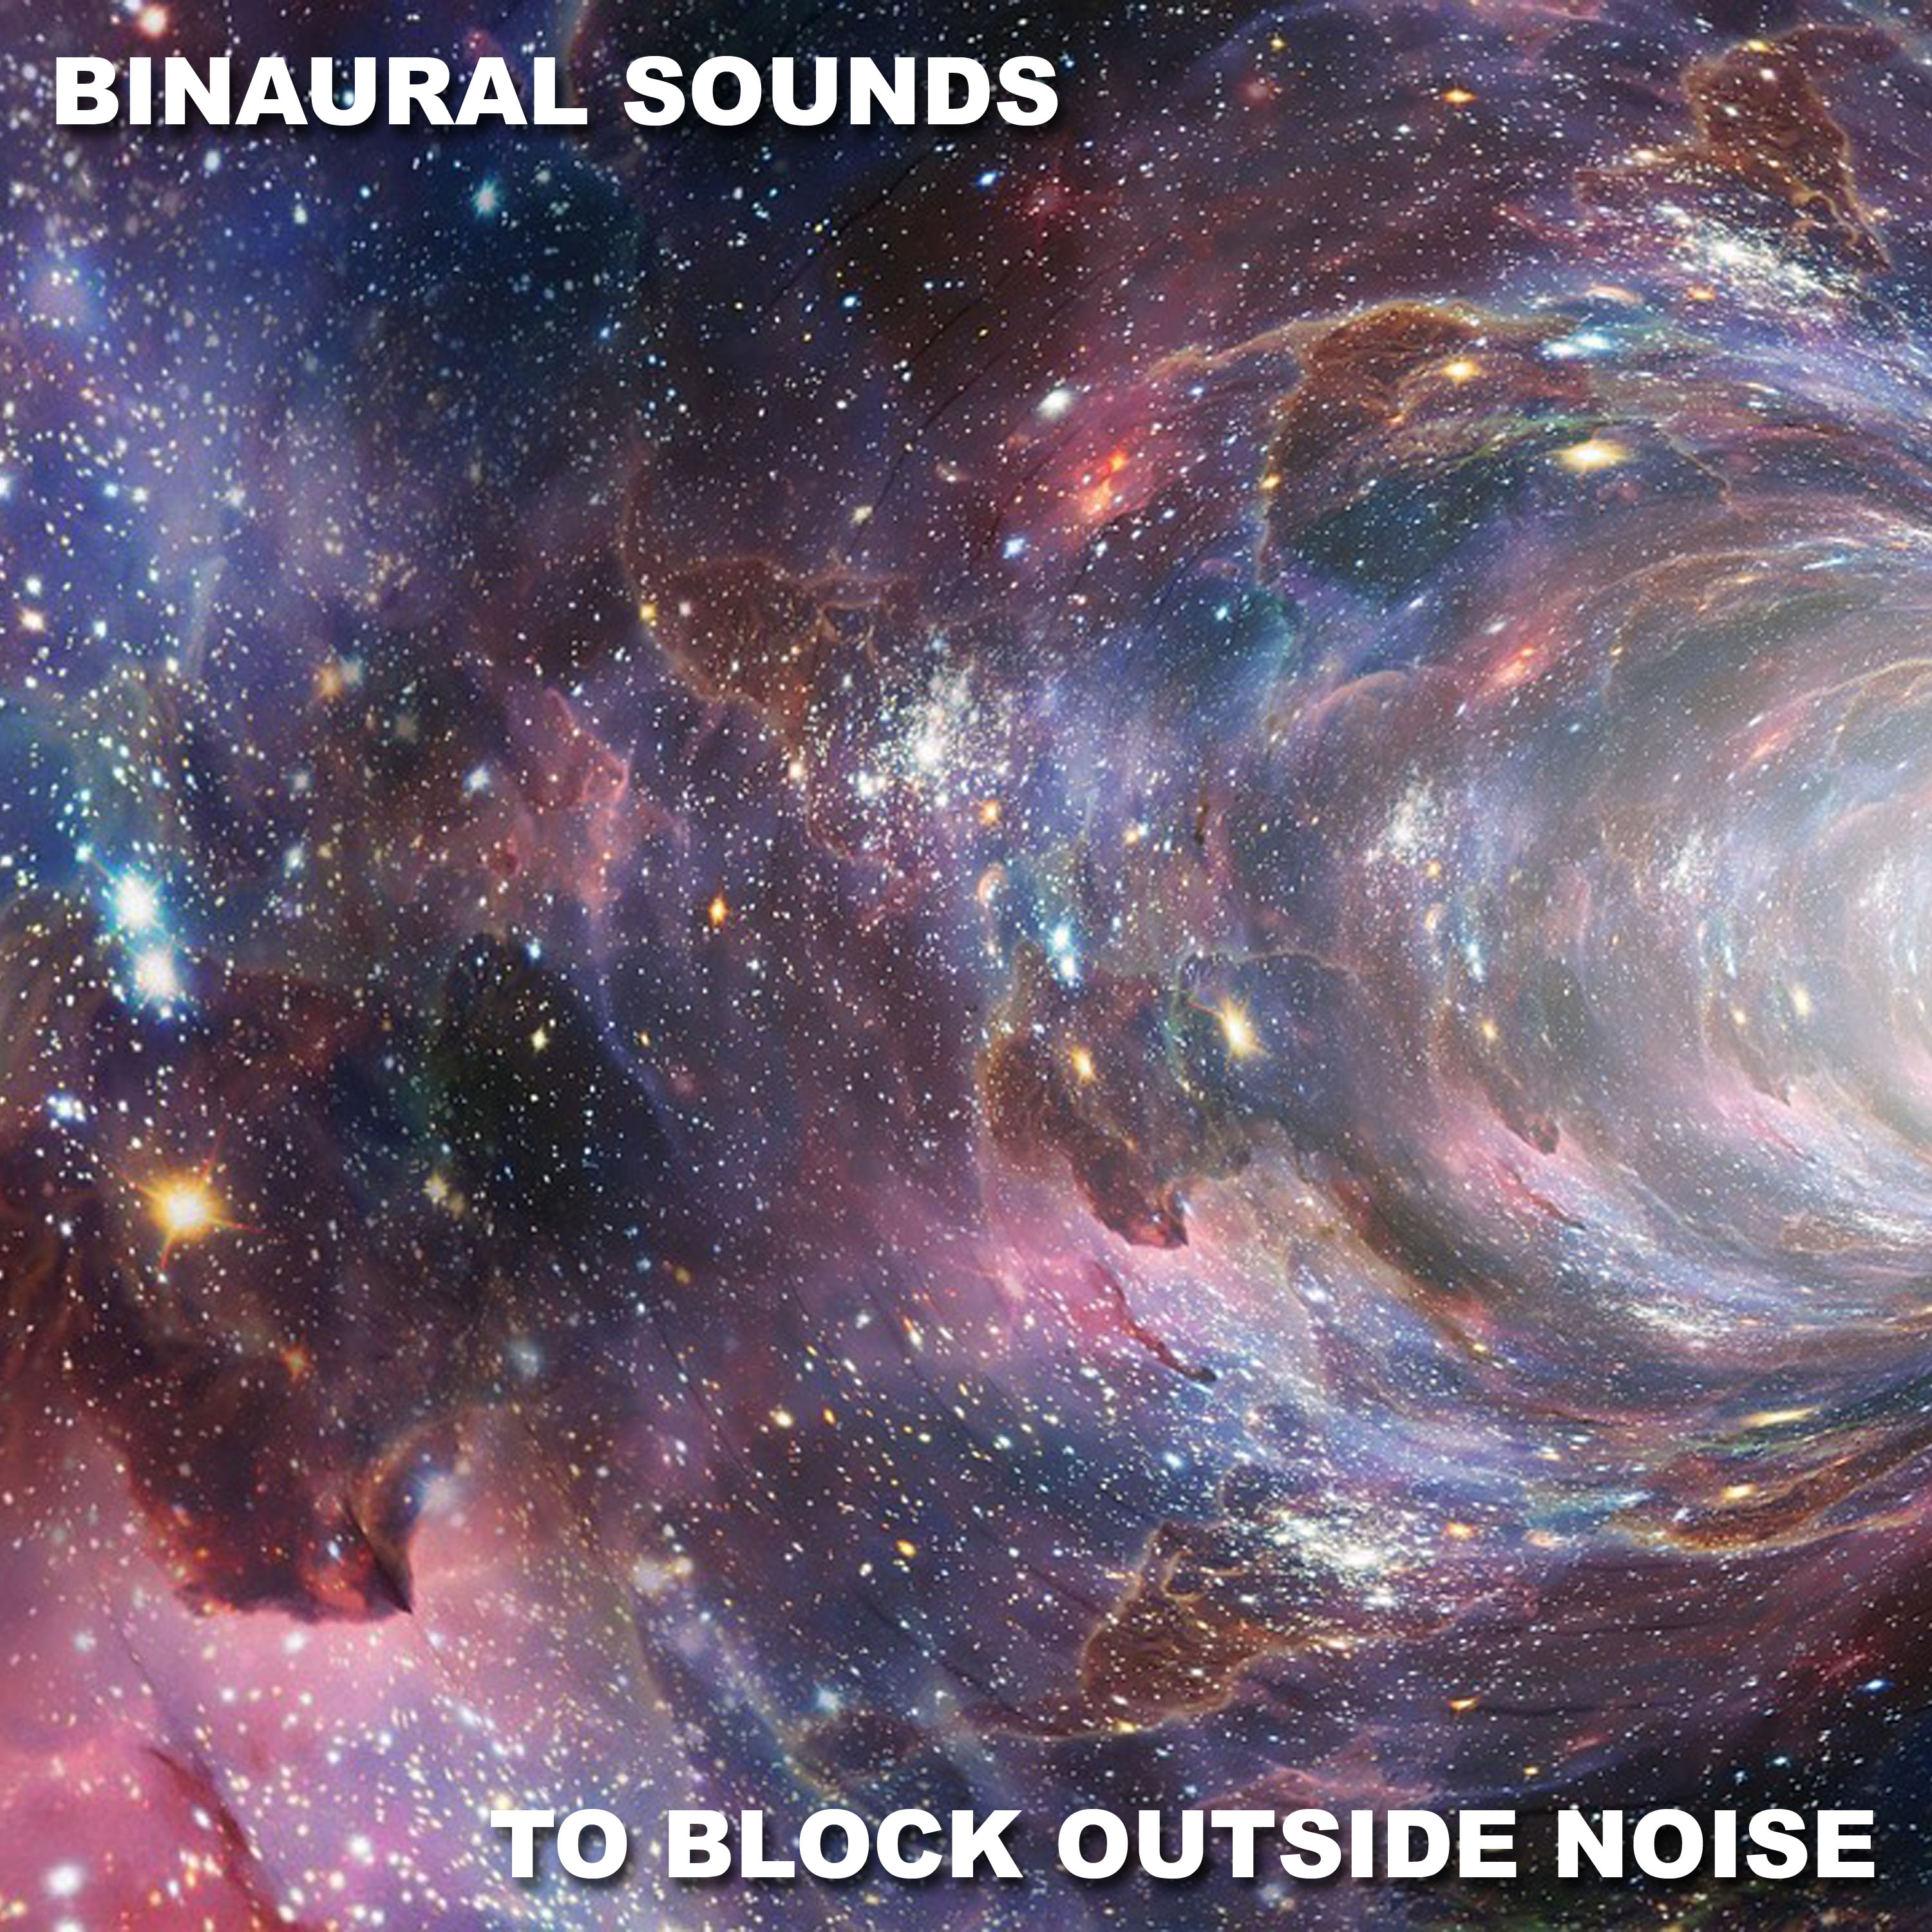 16 of the Best Binaural Sounds for Relaxing the Mind